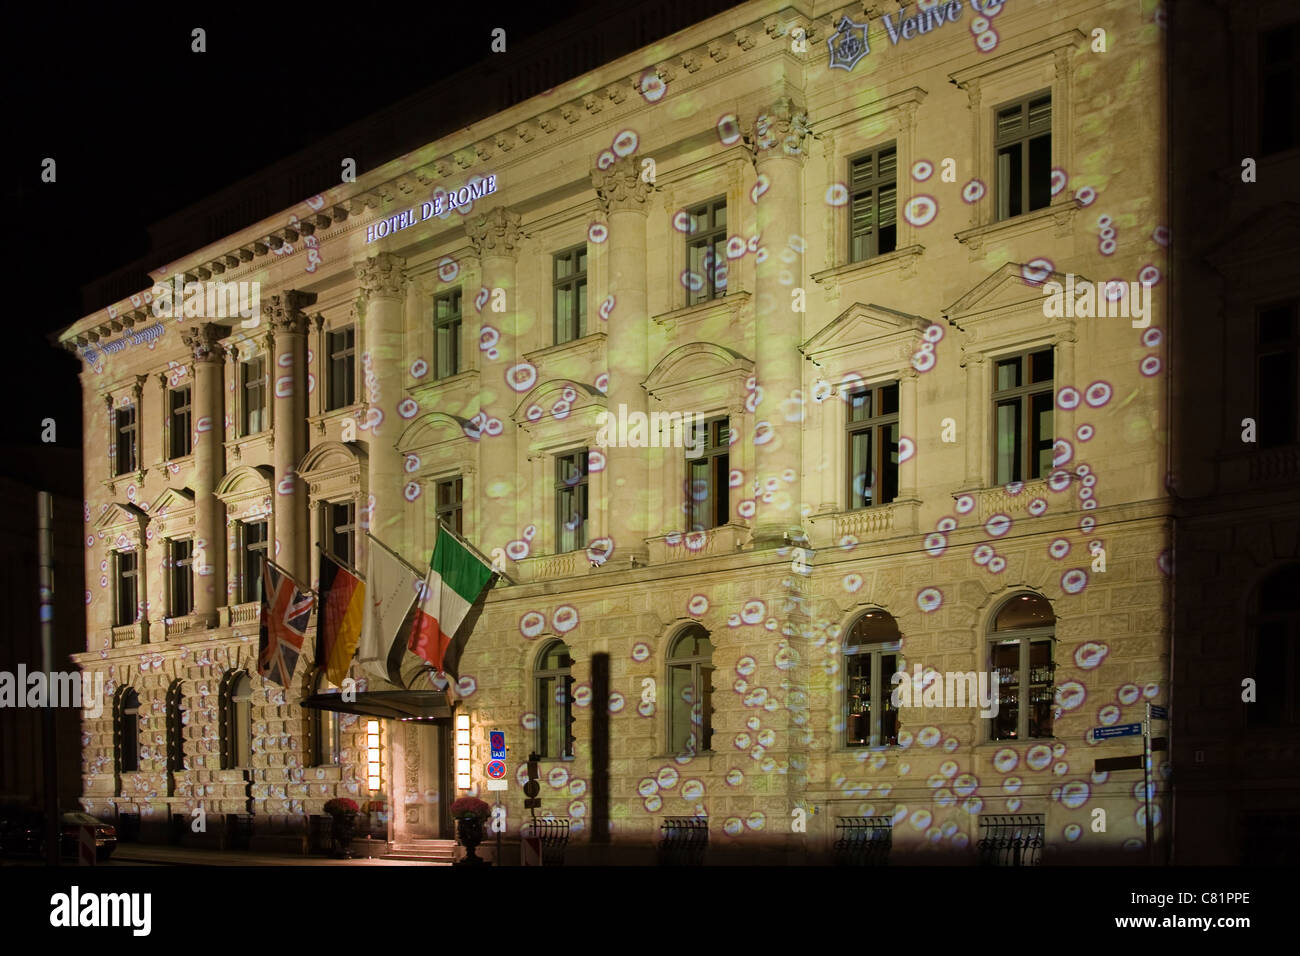 Image taken at night of the Hotel de Rome during the Festival of Lights in Berlin in October 2010. Stock Photo